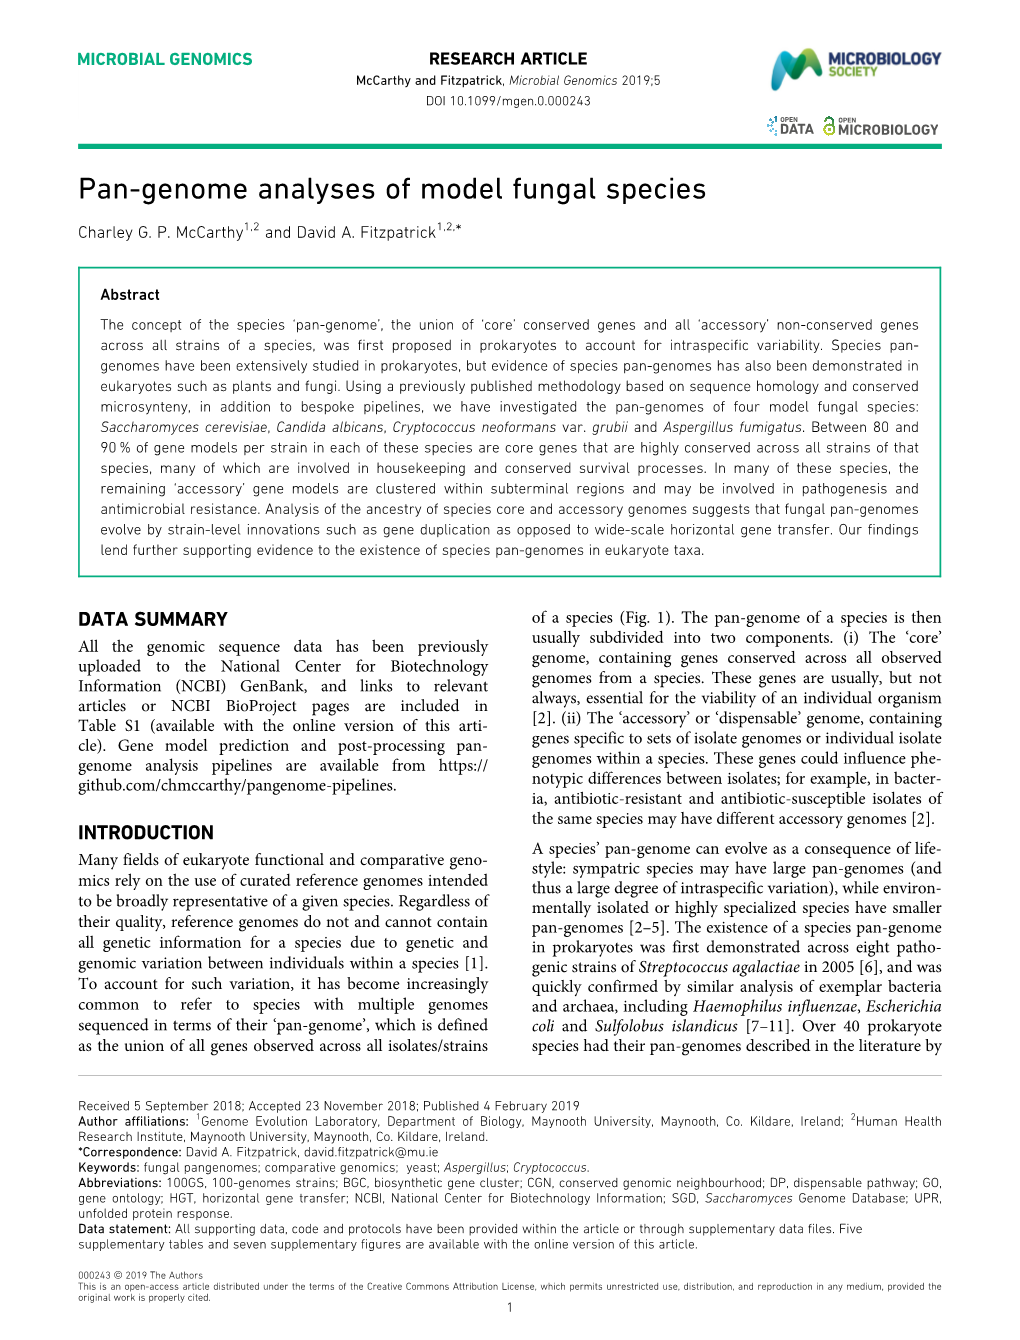 Pan-Genome Analyses of Model Fungal Species